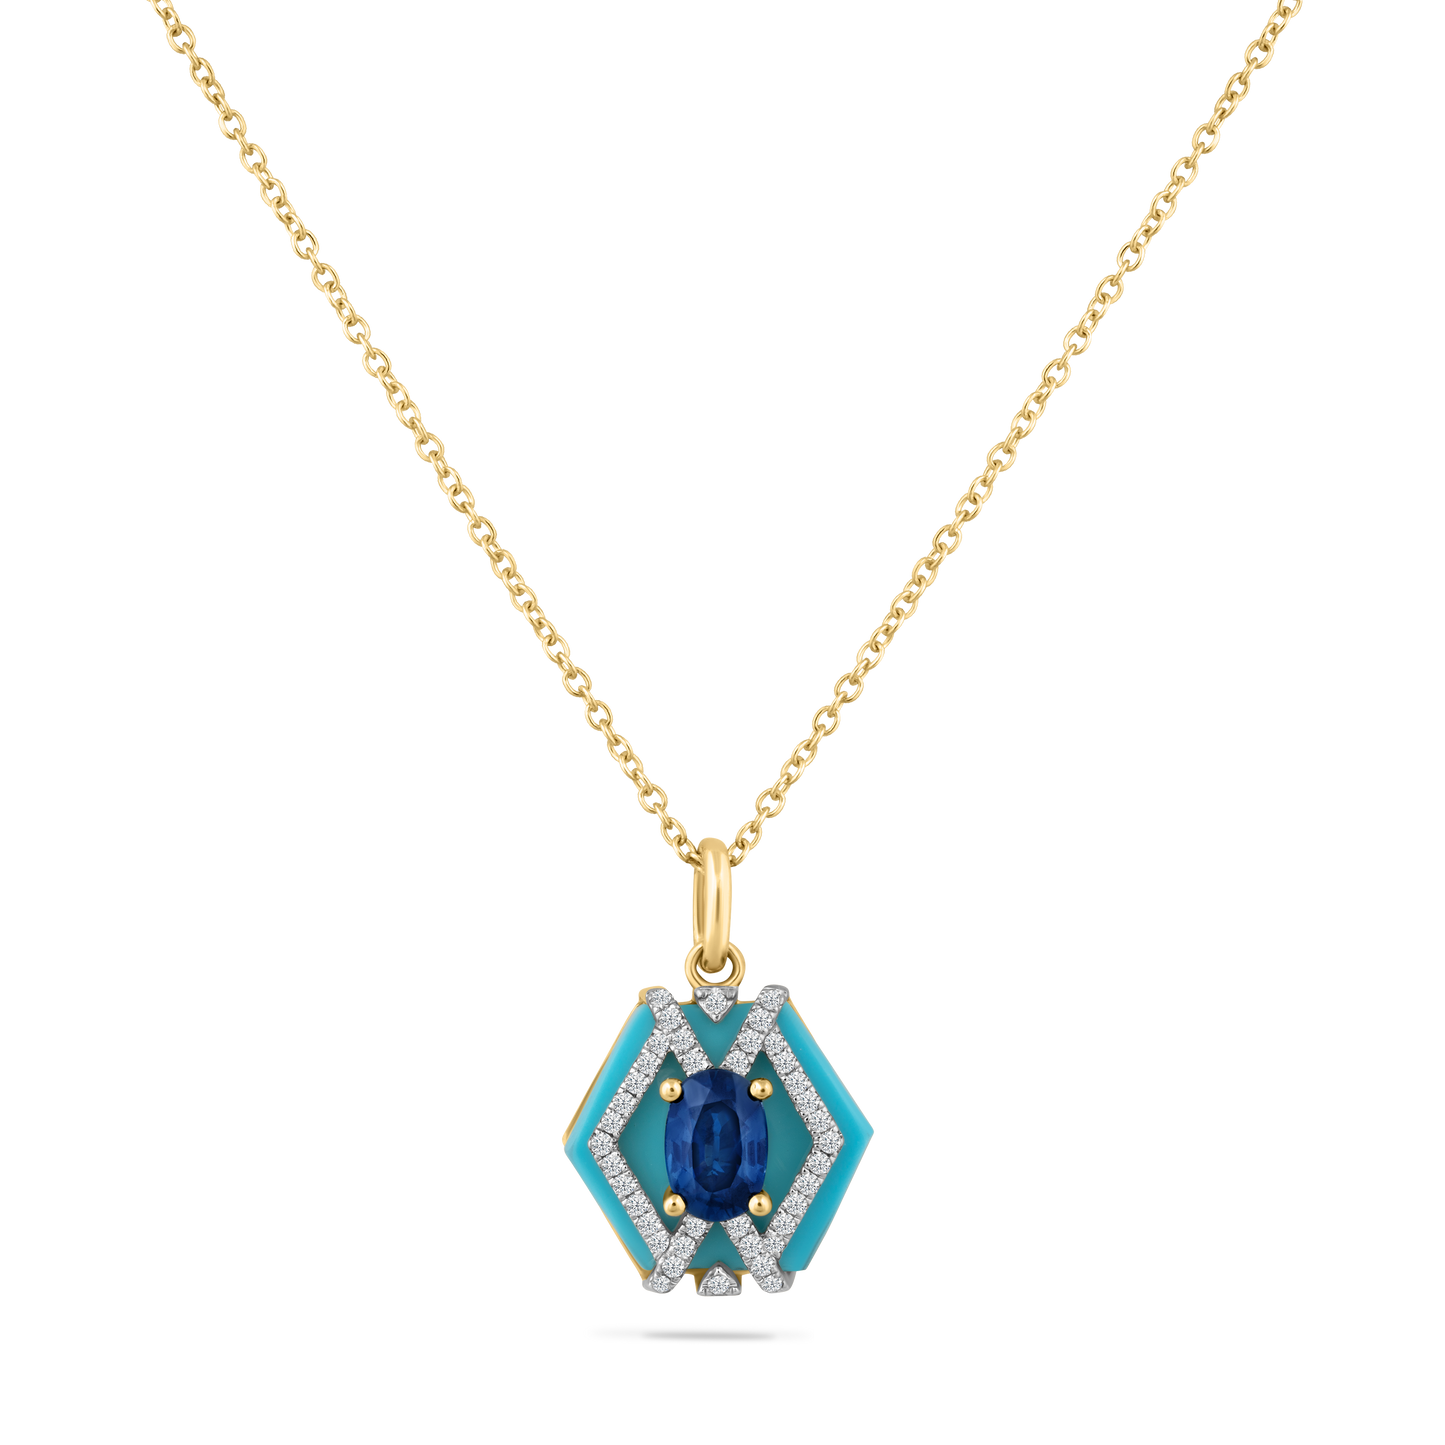 14K HEXAGON SHAPE PENDANT WITH 40 DIAMONDS 0.13CT, 1 SAPPHIRE 0.50CT & TURQUOISE ON 18 INCHES CHAIN